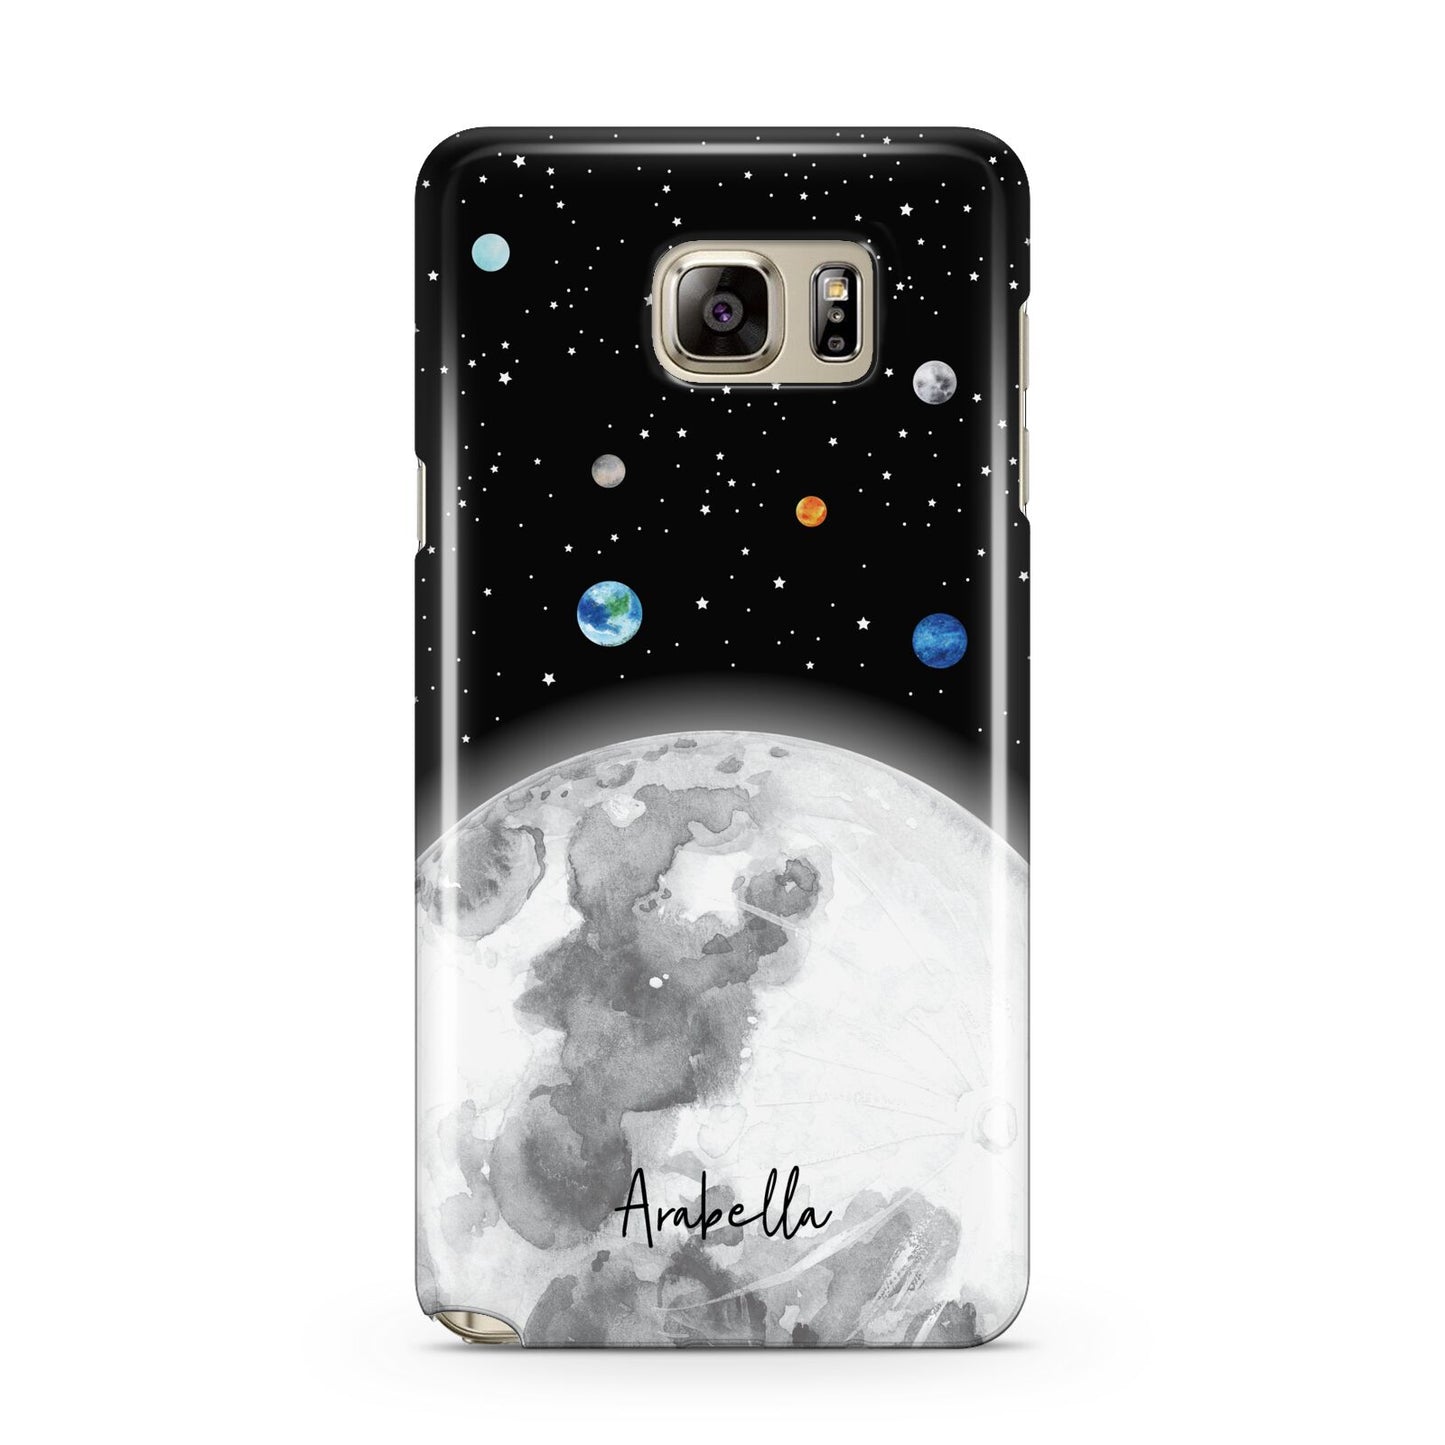 Watercolour Close up Moon with Name Samsung Galaxy Note 5 Case